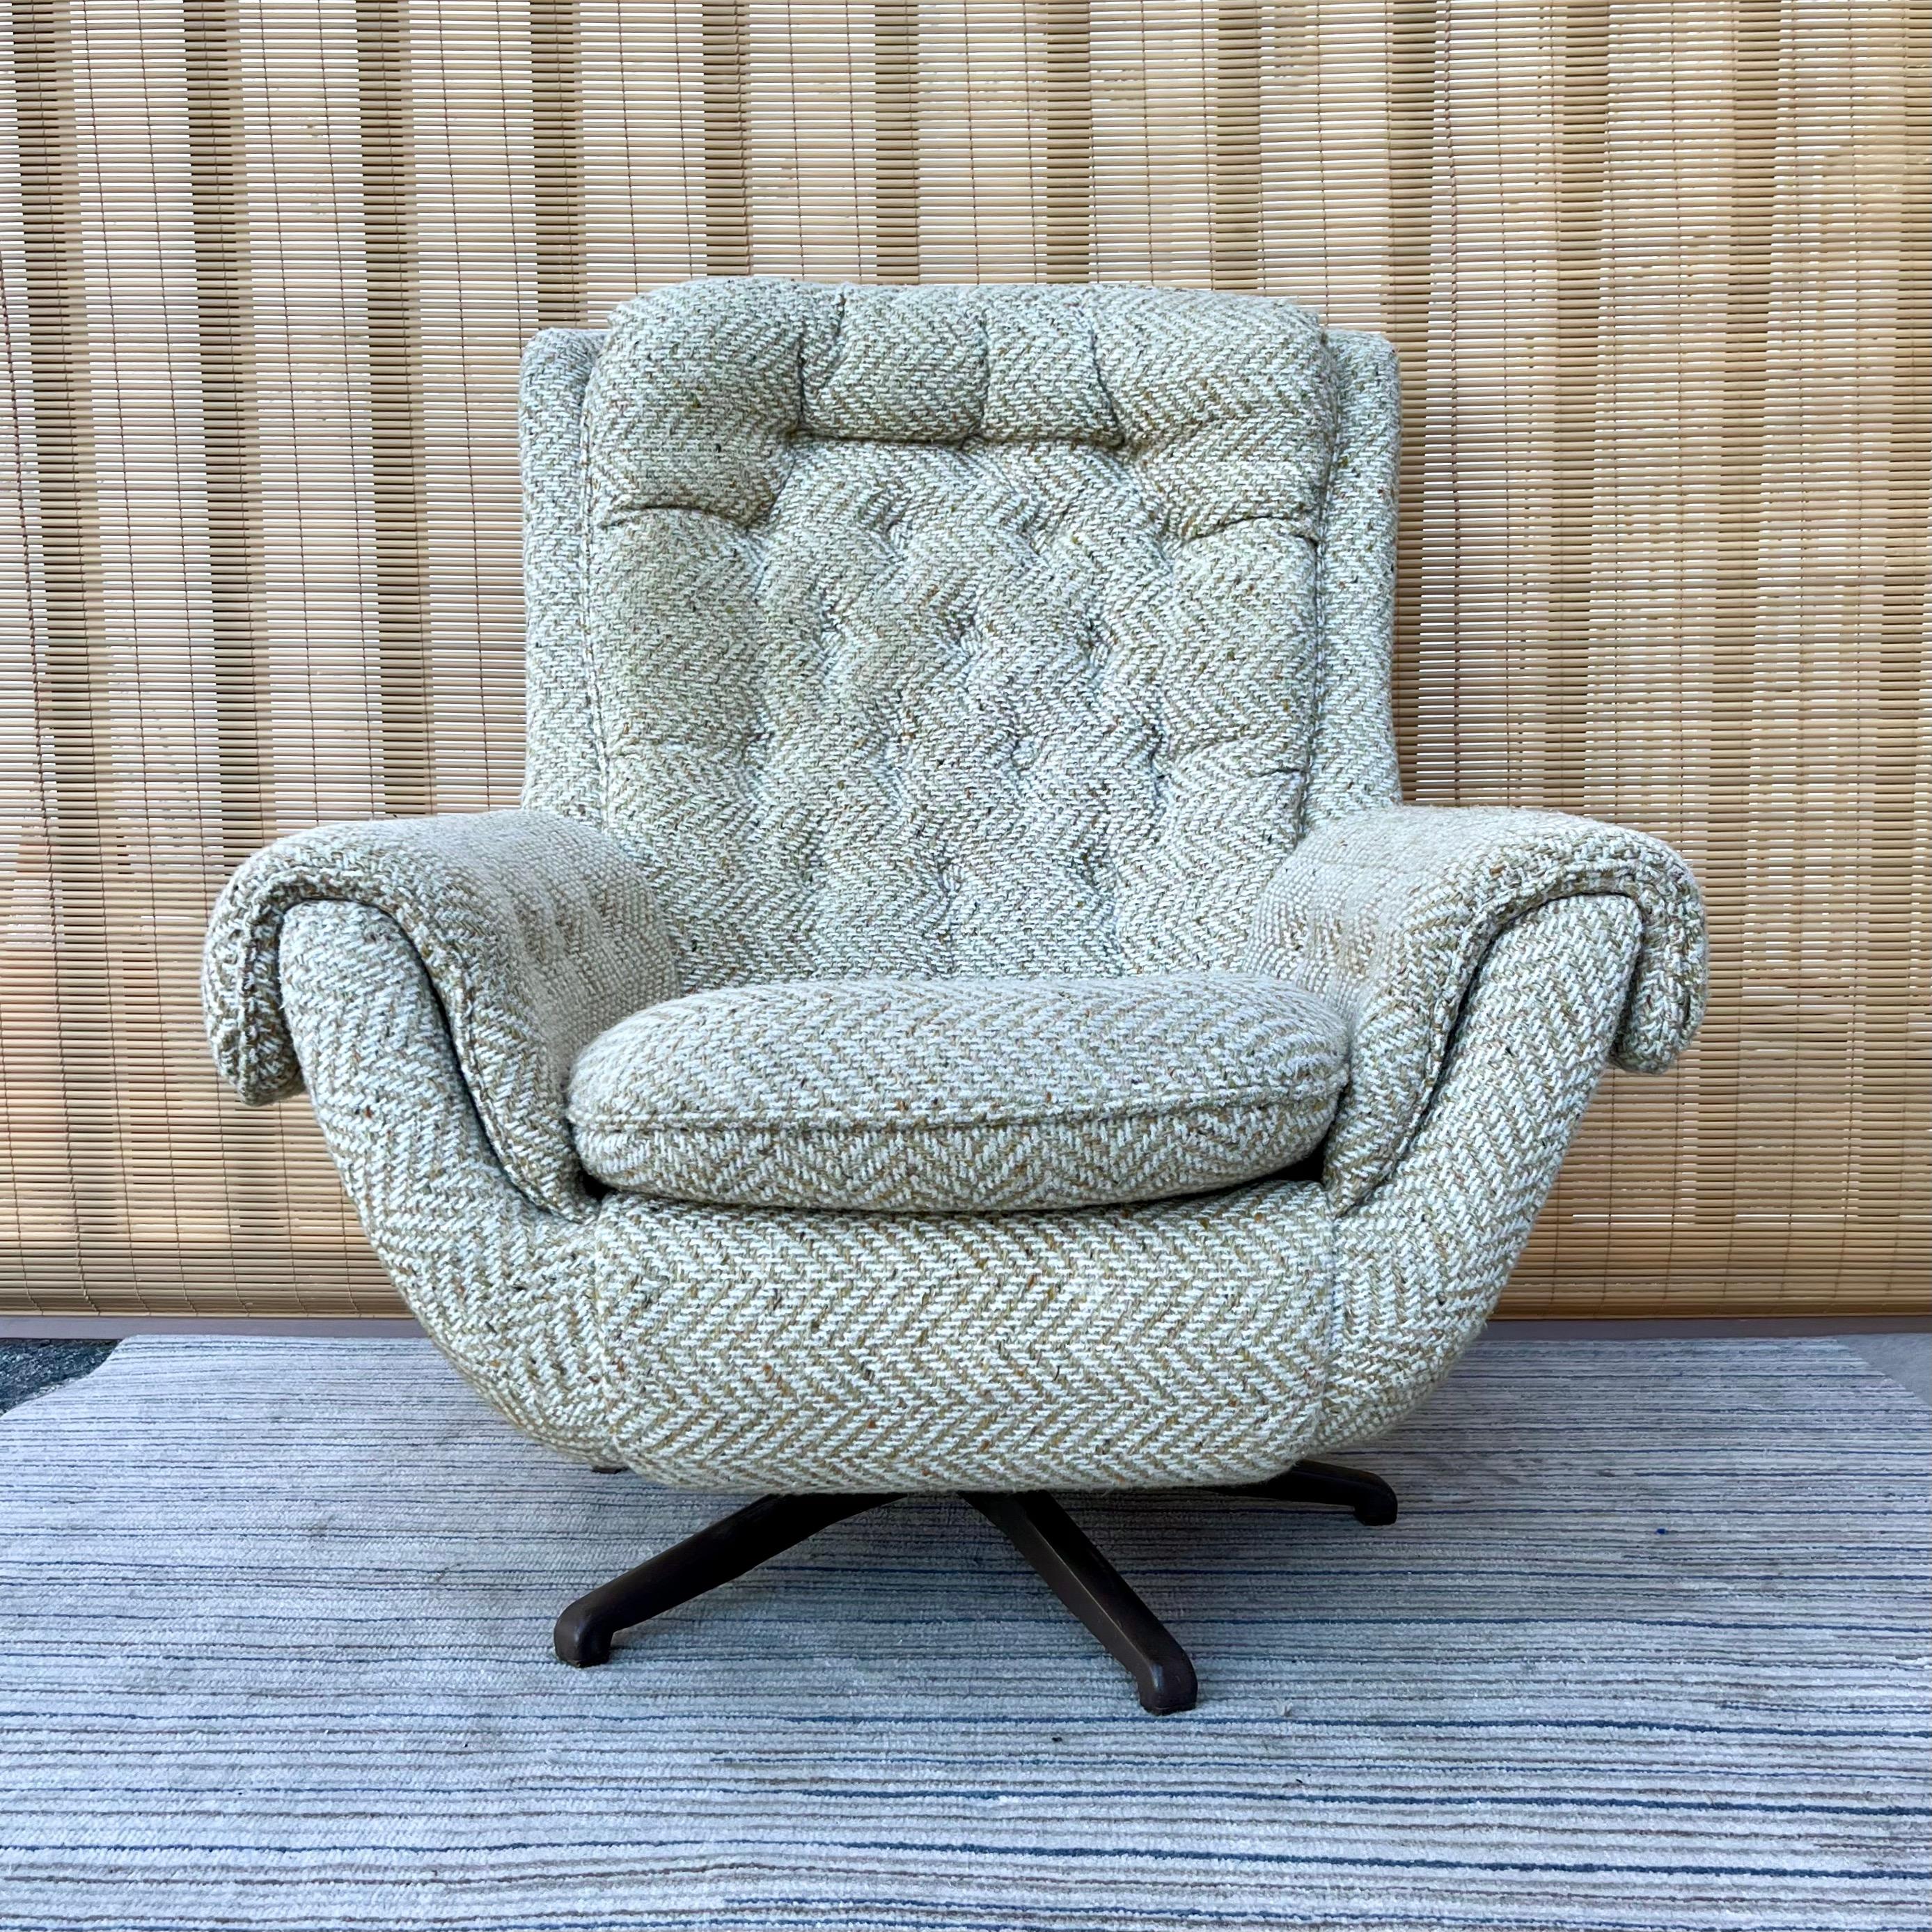 Vintage Mid-Century Modern Swivel Lounge Chair by Carter chair Company in the Arne Jacobsen Egg Chair Style. Circa 1960s. 
Features a swivel and rocking mechanism with metals legs, an egg-shaped backrest, a removable seat cushion, and the original